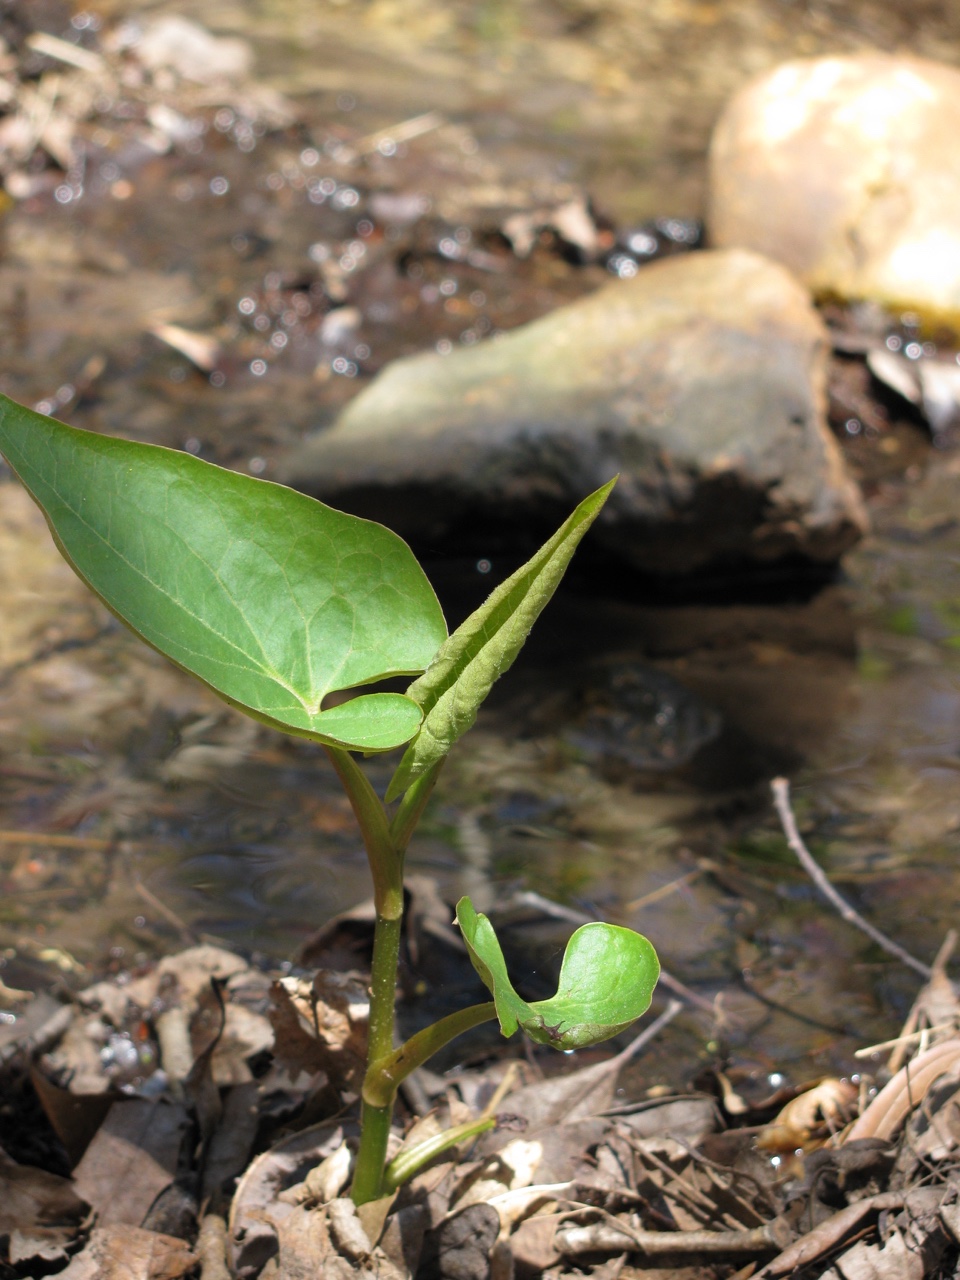 The Scientific Name is Saururus cernuus. You will likely hear them called Lizard's-tail, Water-dragon, American Swamp Lily. This picture shows the Growing by a stream of Saururus cernuus